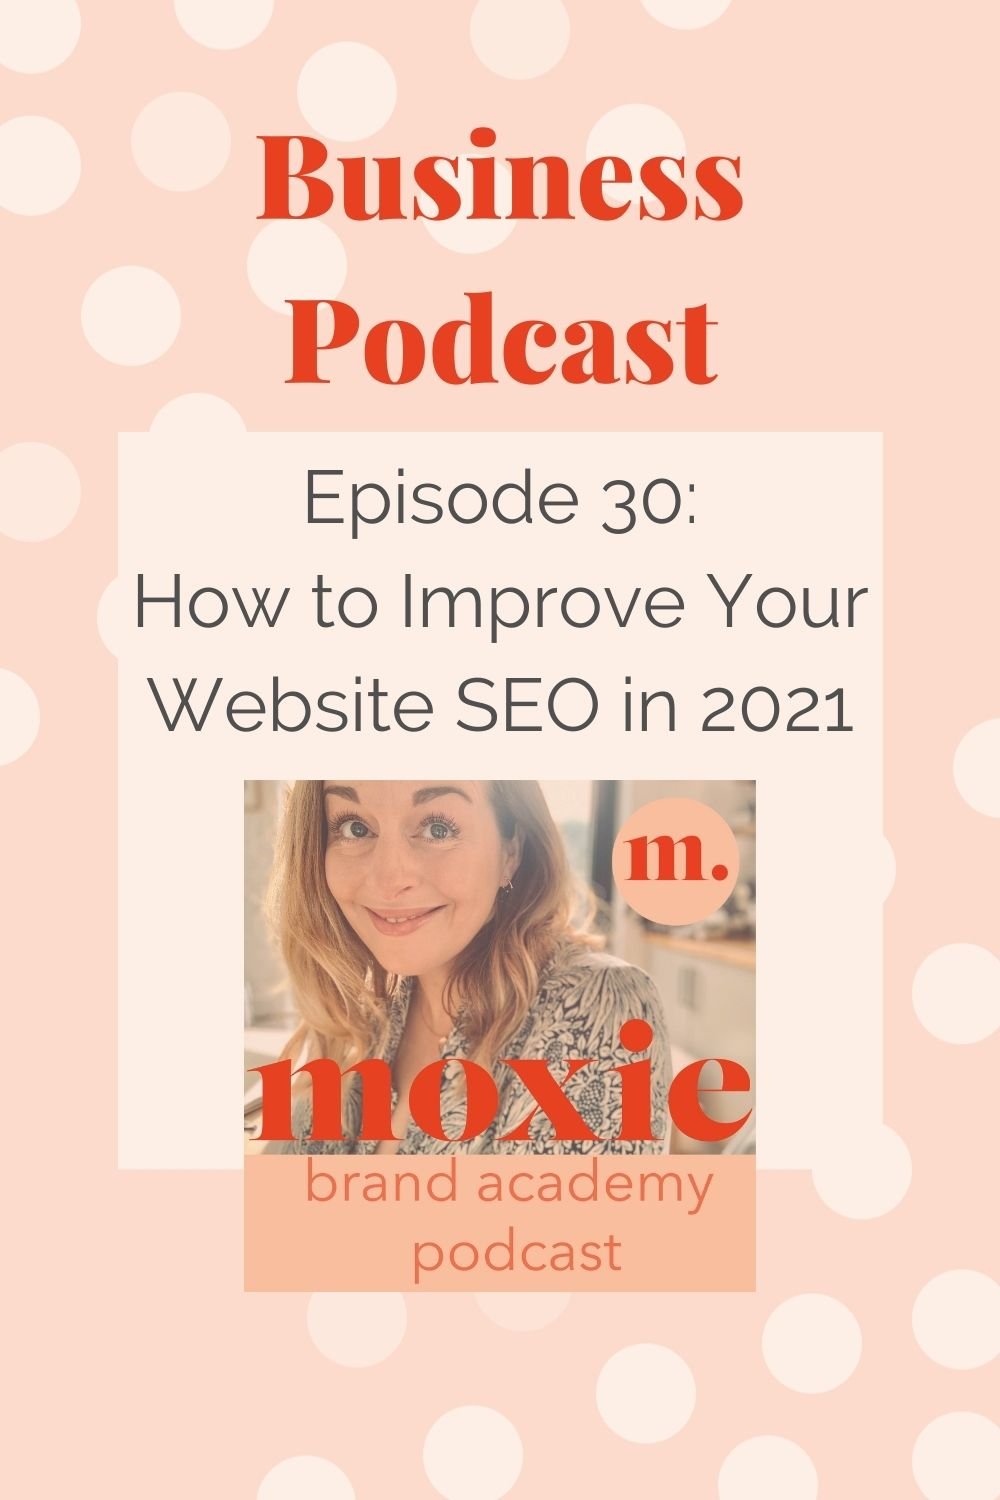 How to Improve Your Website SEO in 2021